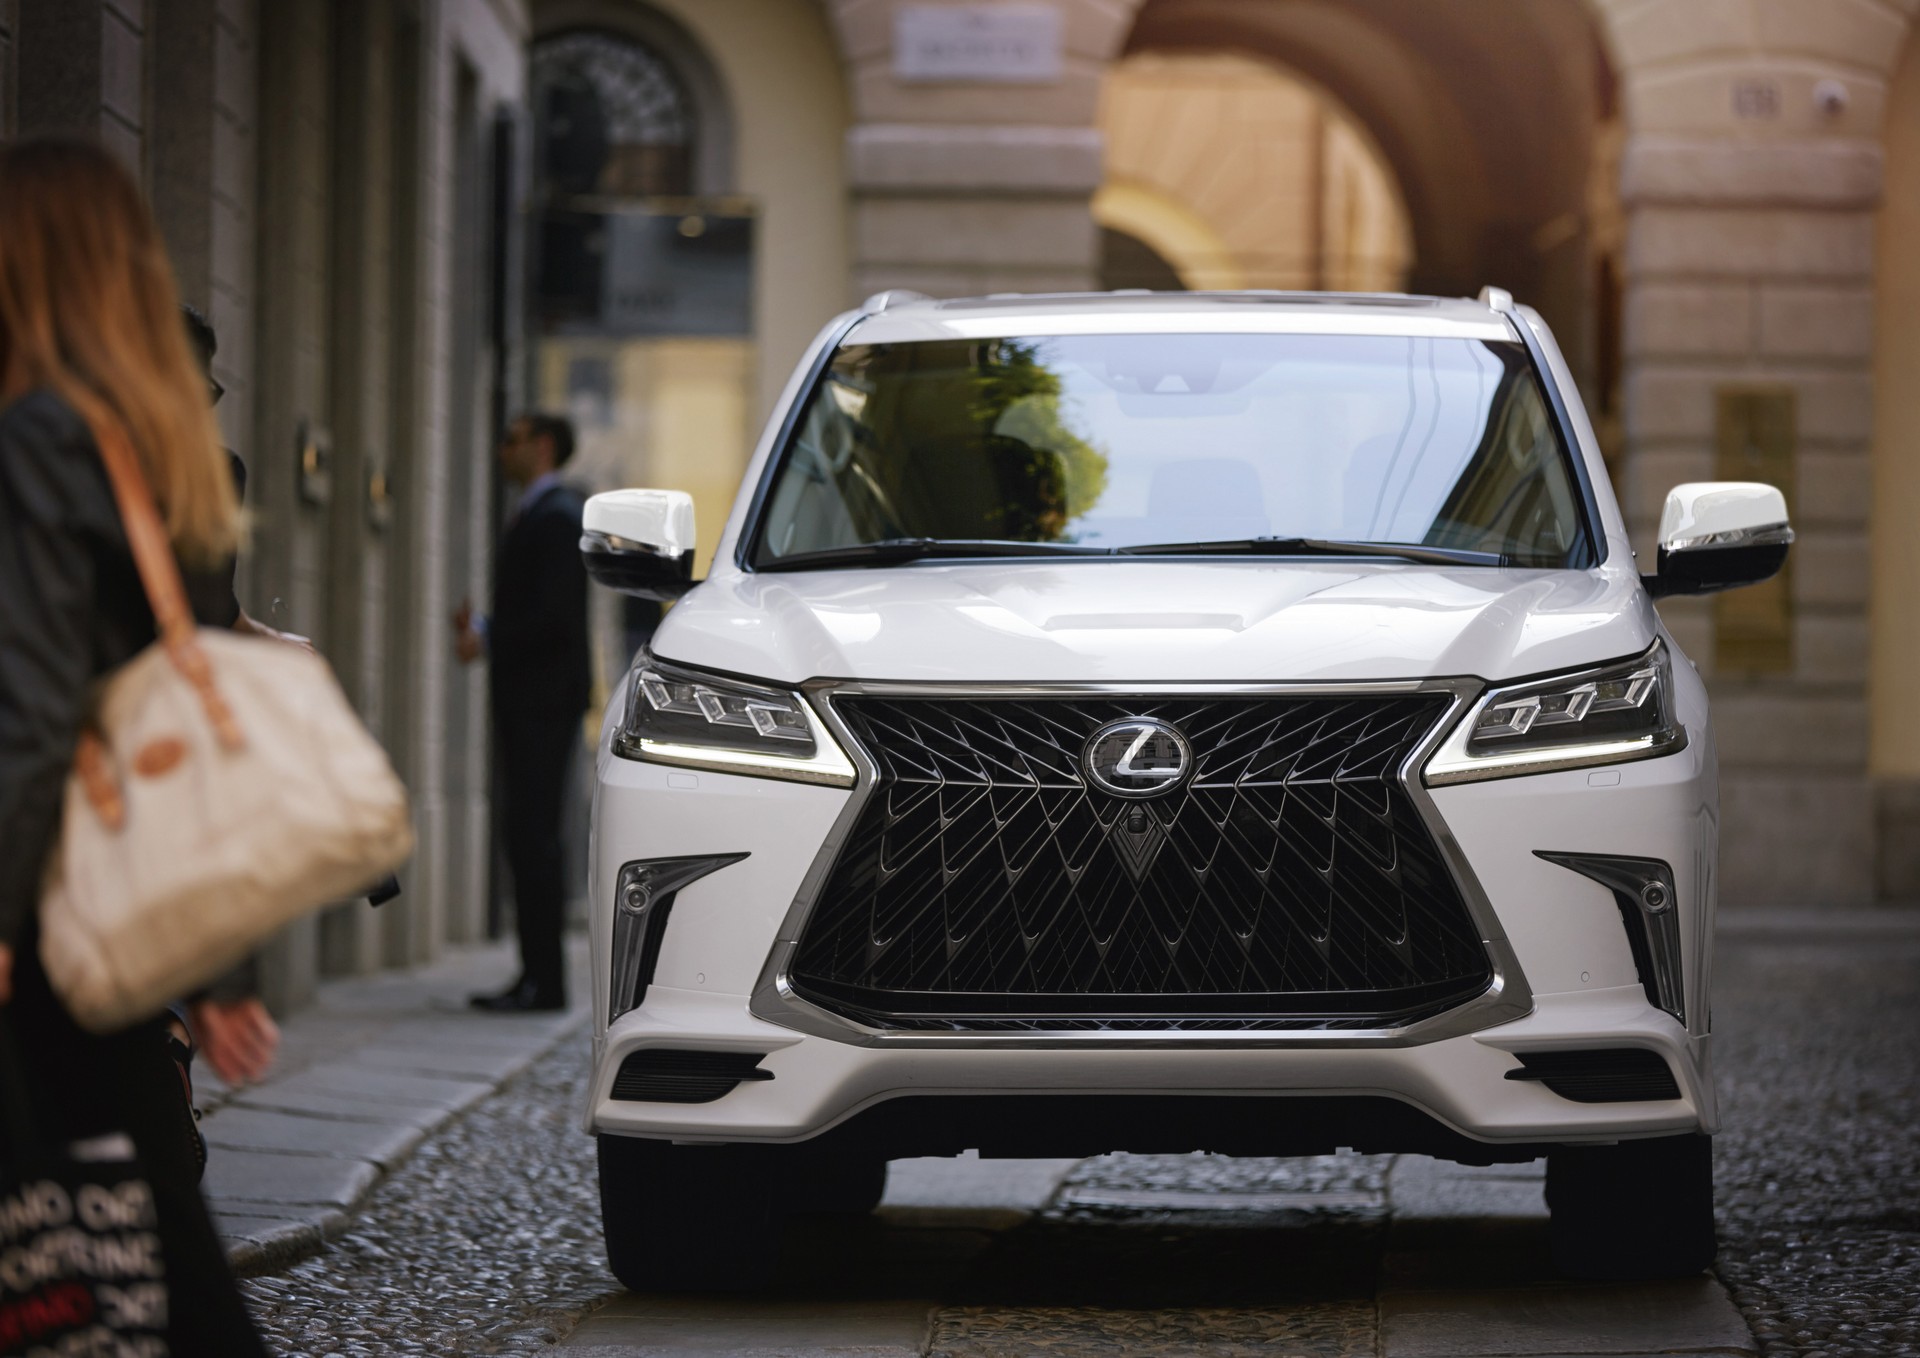 2020 Lexus Lx Gets A Tad More Aggressive Thanks To A New